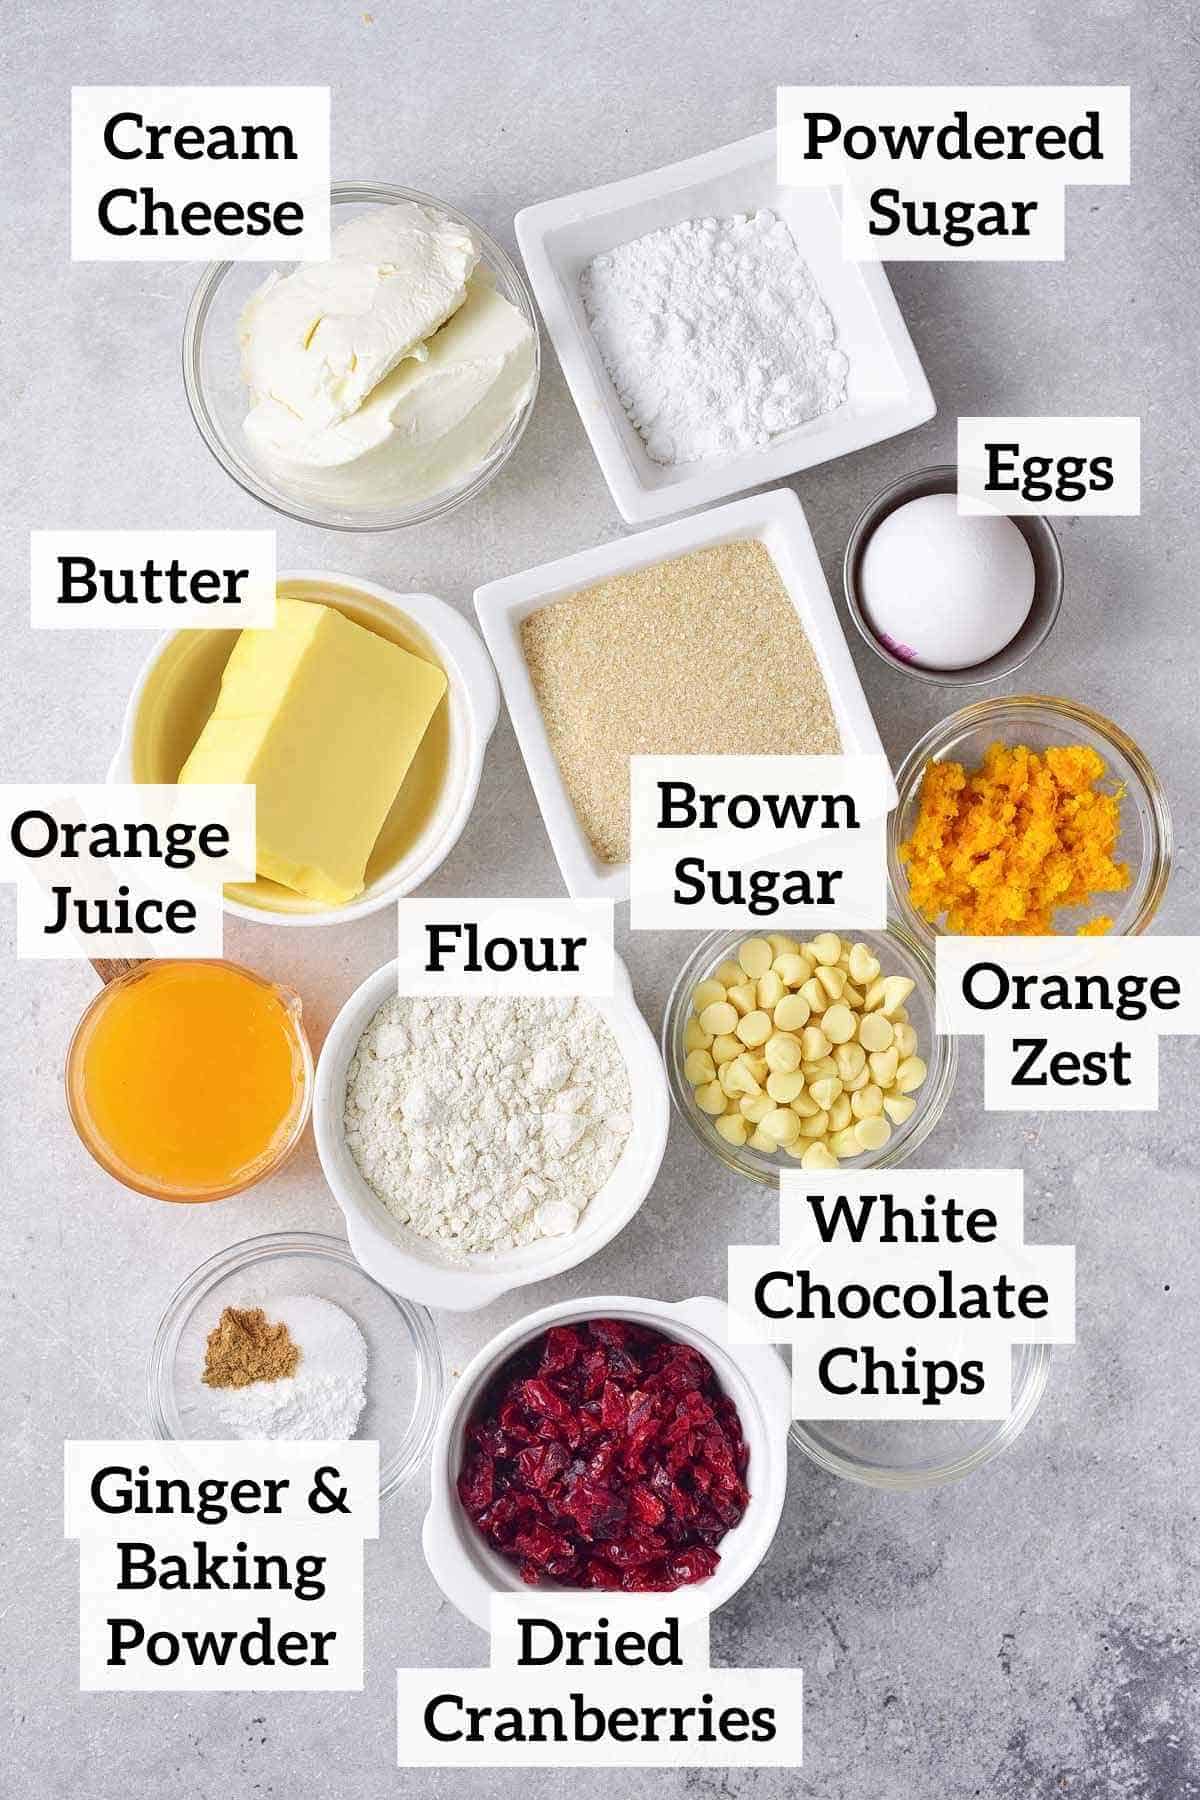 cream cheese, butter, orange juice, white chocolate chips, dried cranberries and other ingredients.